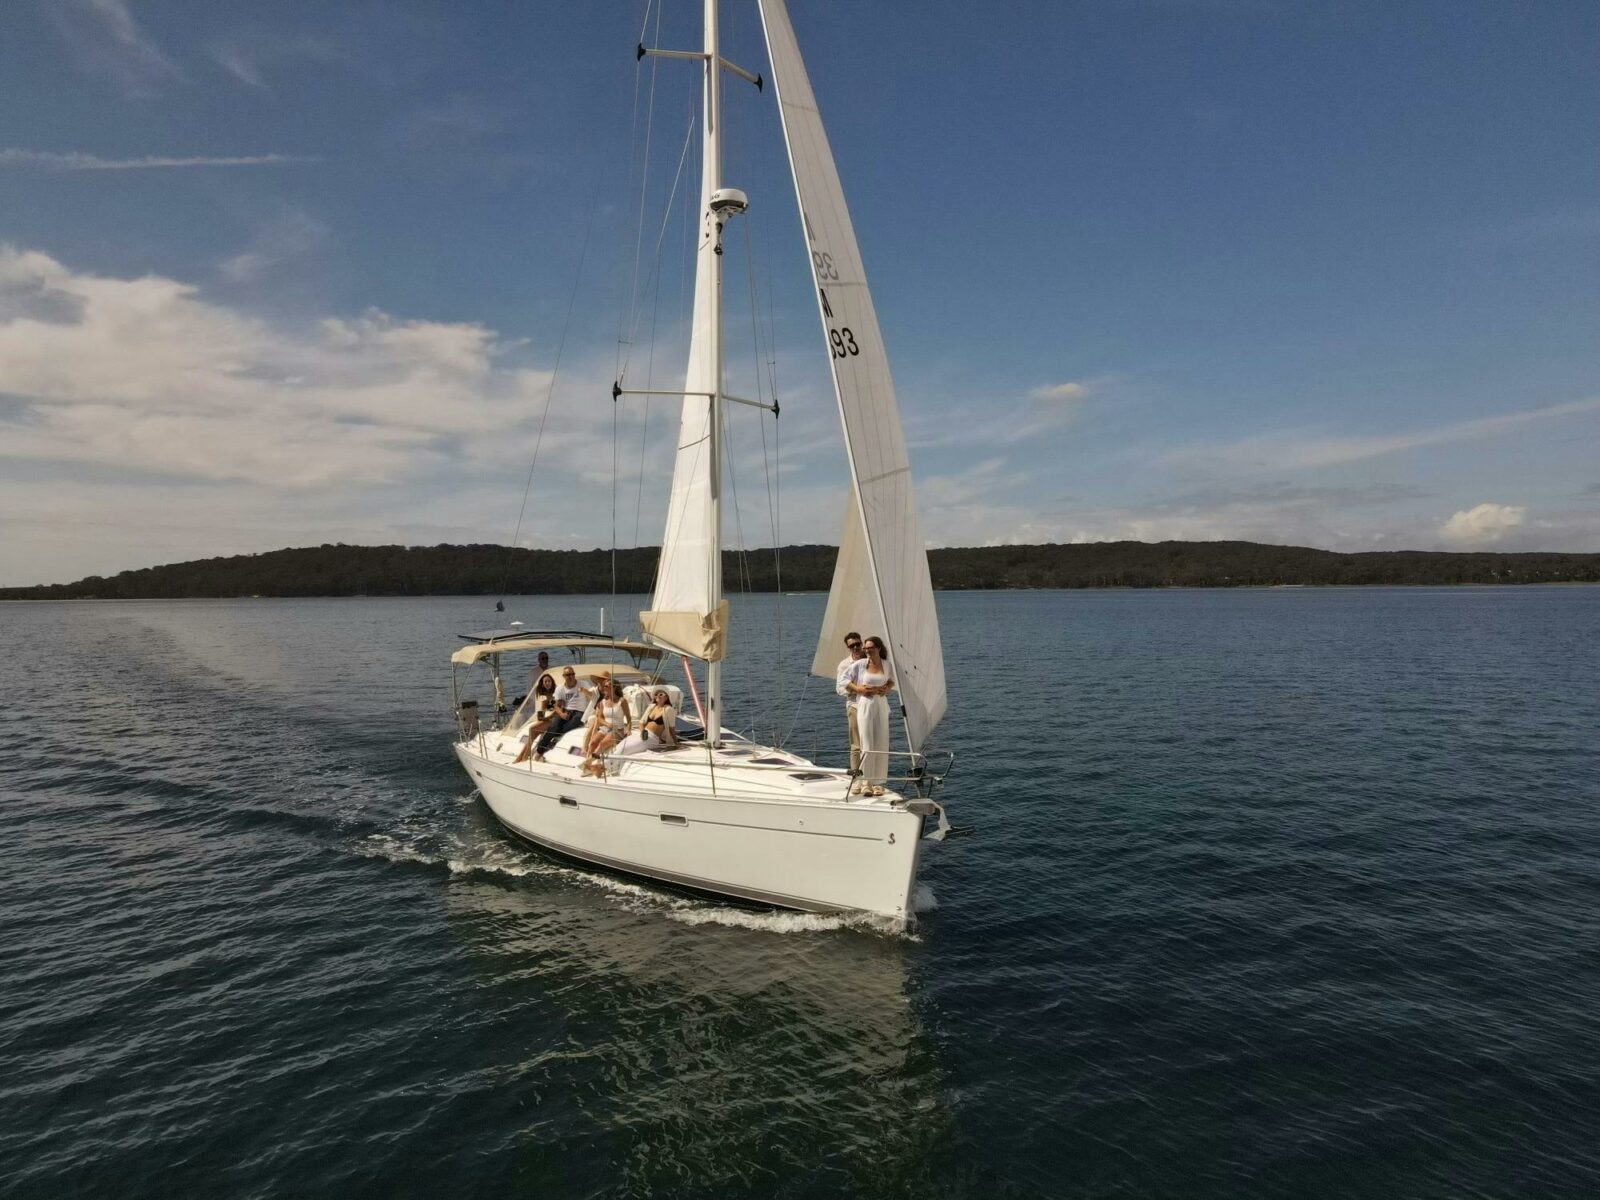 Silver Sun Sailing offers unique experiences onboard a 40 foot Benetau yacht on Lake Macquarie.